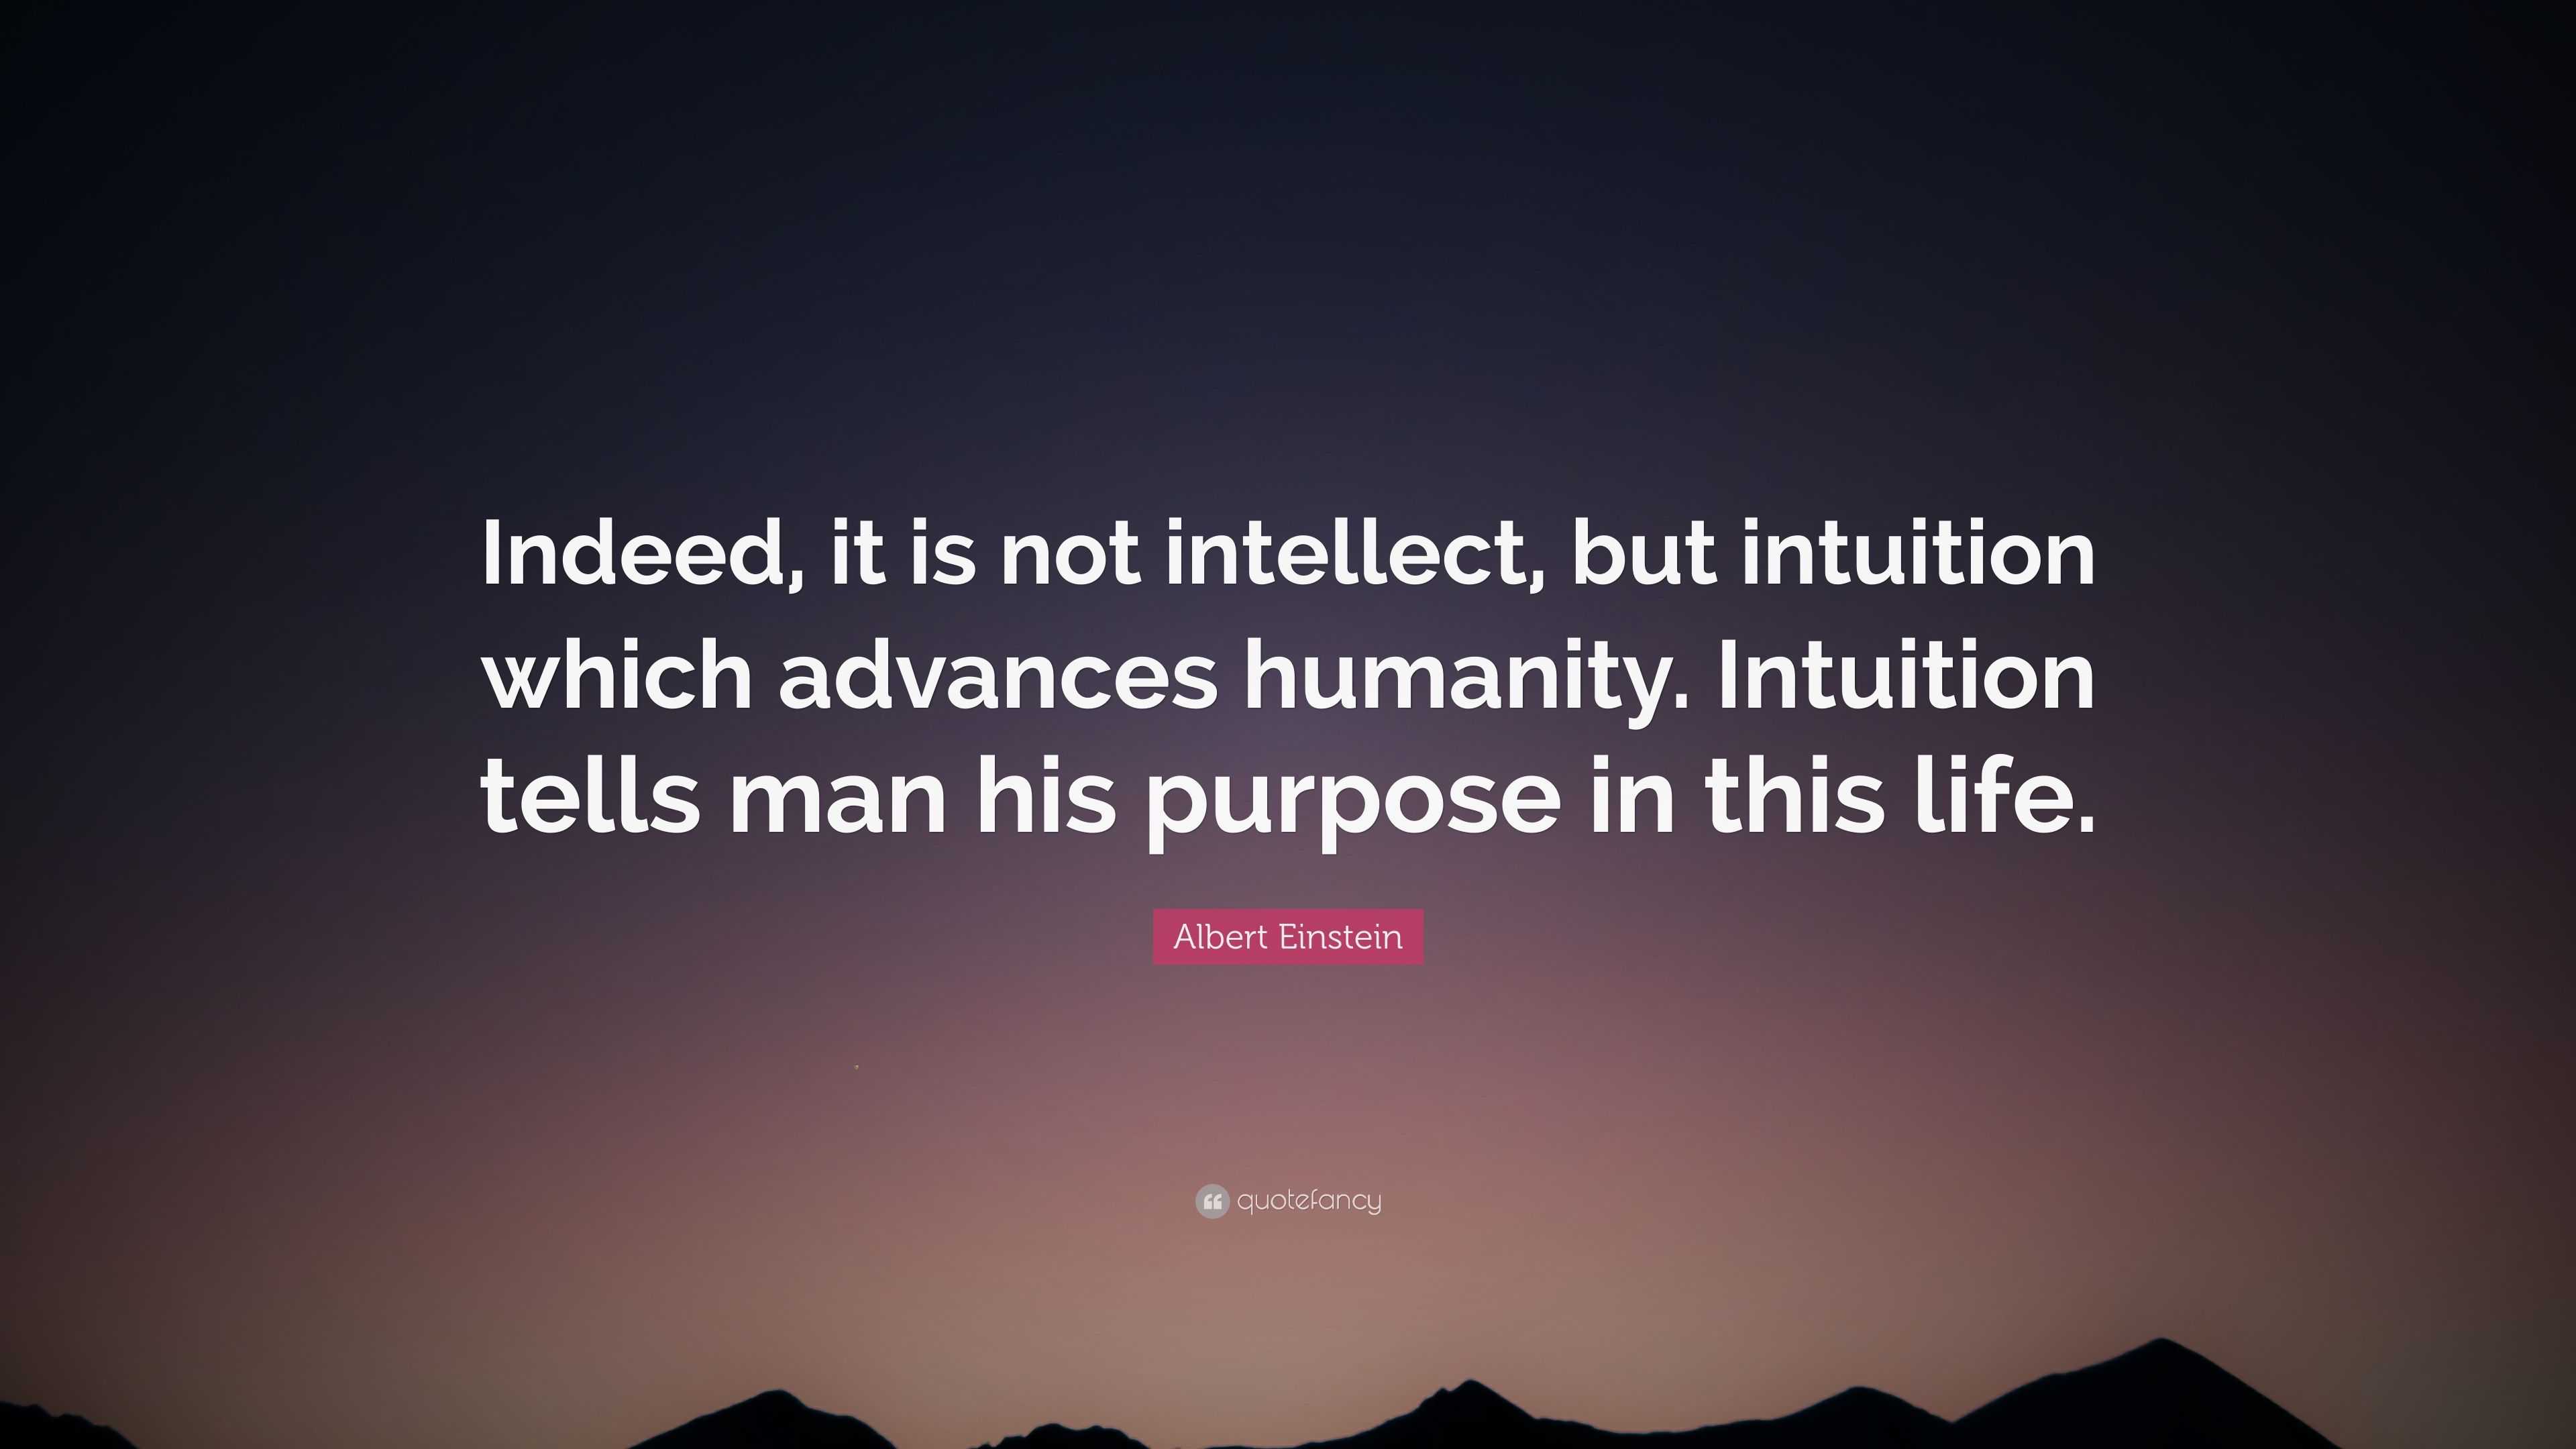 Albert Einstein Quote “Indeed, it is not intellect, but intuition